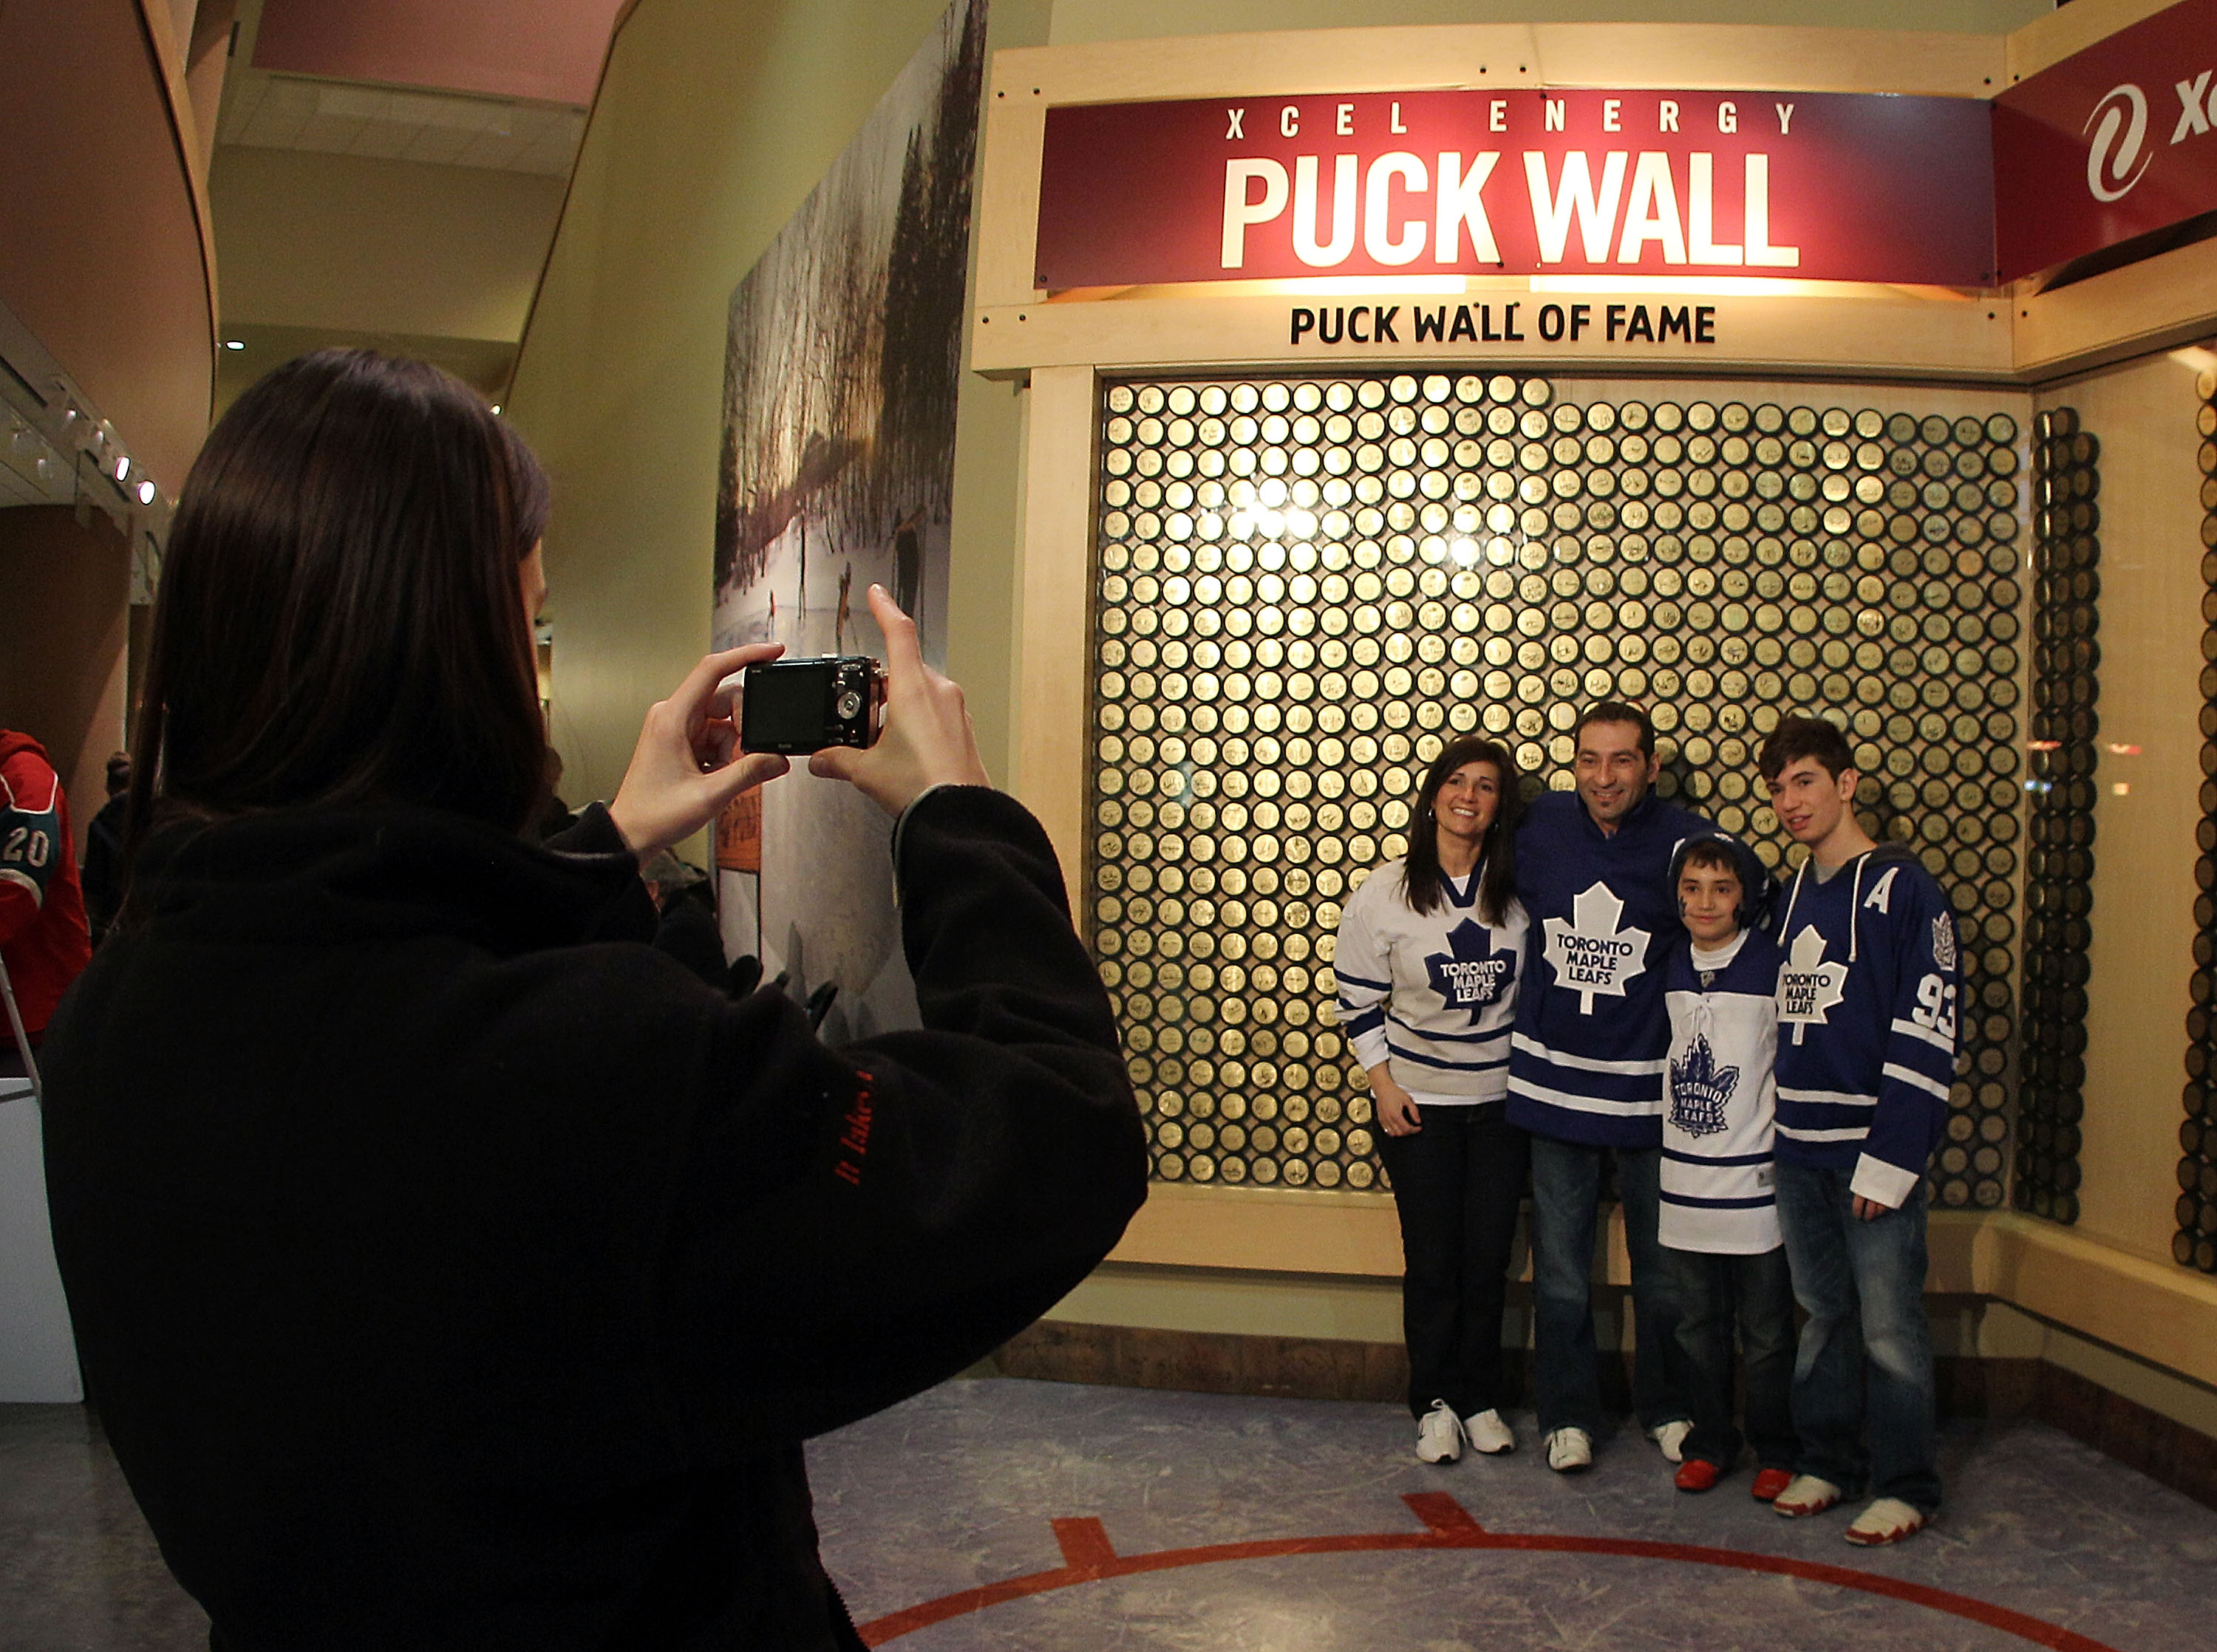 ST PAUL, MN - MARCH 22: Fans pose in front of the puck wall of fame prior to the game between the Minnesota Wild and the Toronto Maple Leafs at the Xcel Energy Center on March 22, 2011 in St Paul, Minnesota. (Photo by Bruce Bennett/Getty Images)